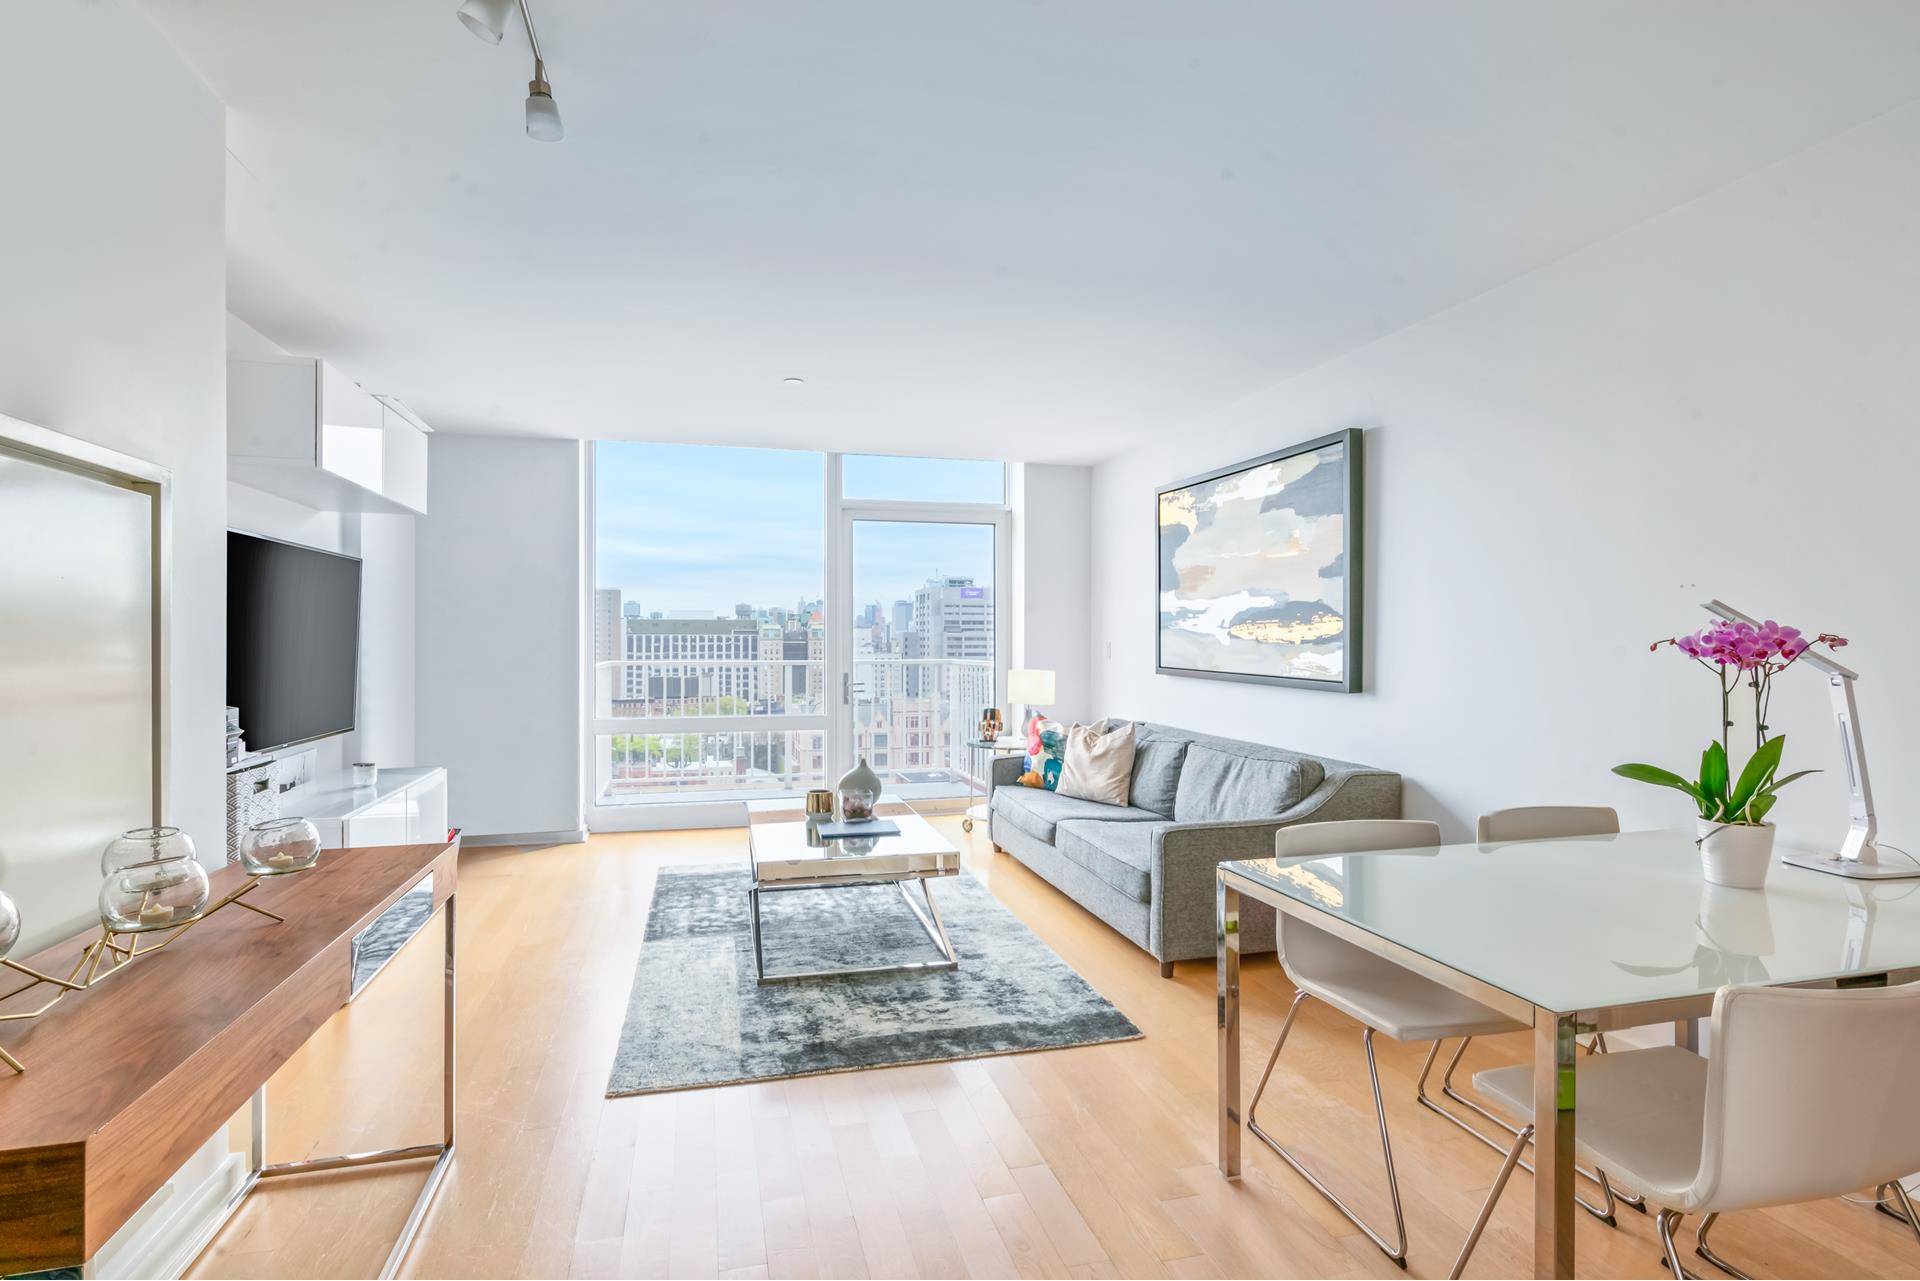 New To Market Sublime and Sun Flooded 2 Bedroom 2 Bath residence with open southern views at the Gramercy Starck Condominium.